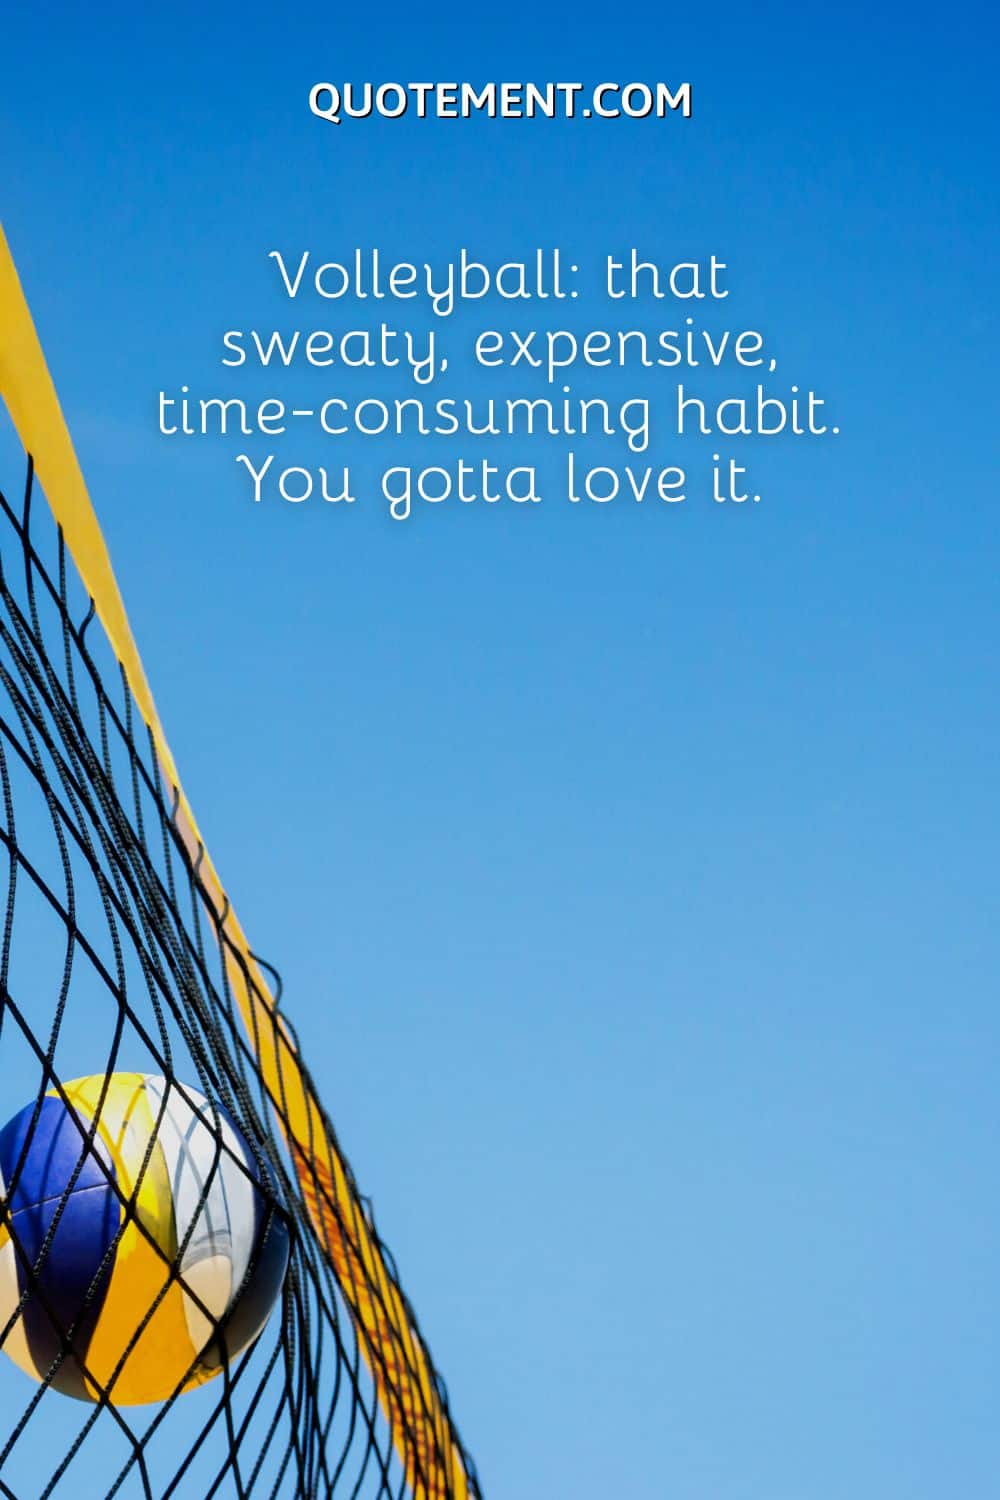 Volleyball that sweaty, expensive, time-consuming habit. You gotta love it.